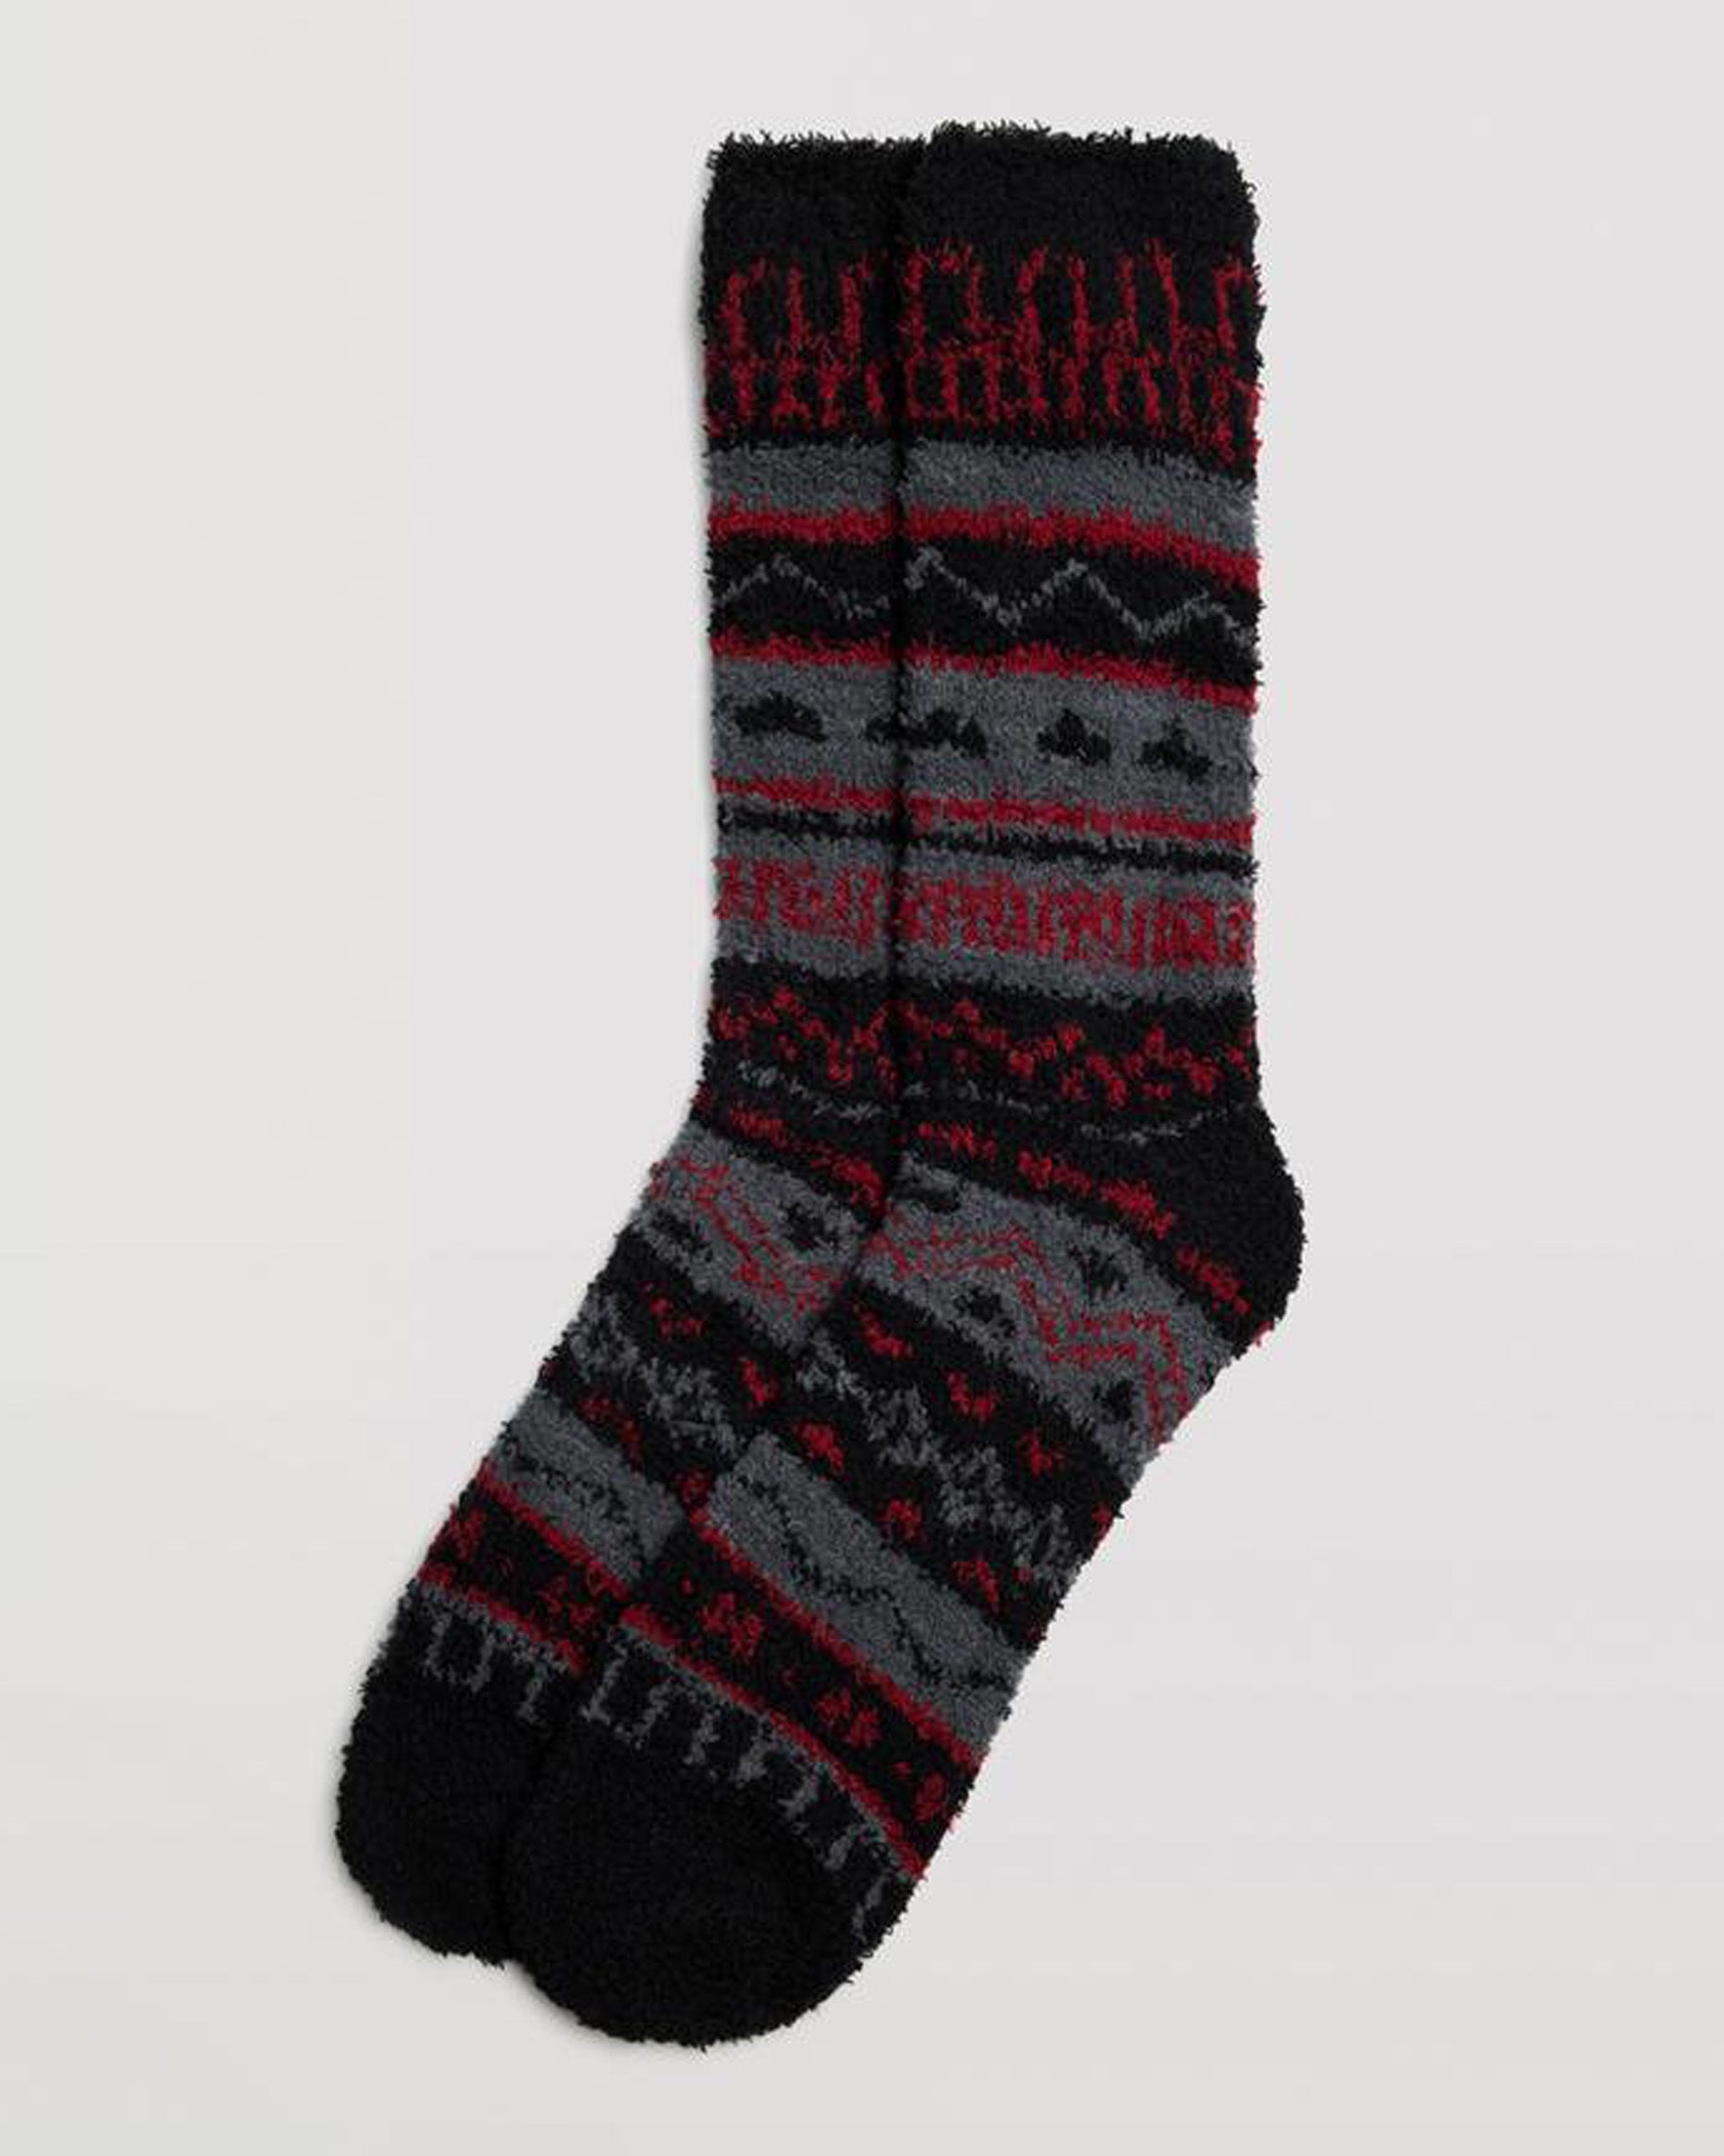 Ysabel Mora 22892 Aztec Flannel Socks - Soft and fluffy black Aztec style patterned house thermal socks in red and grey.